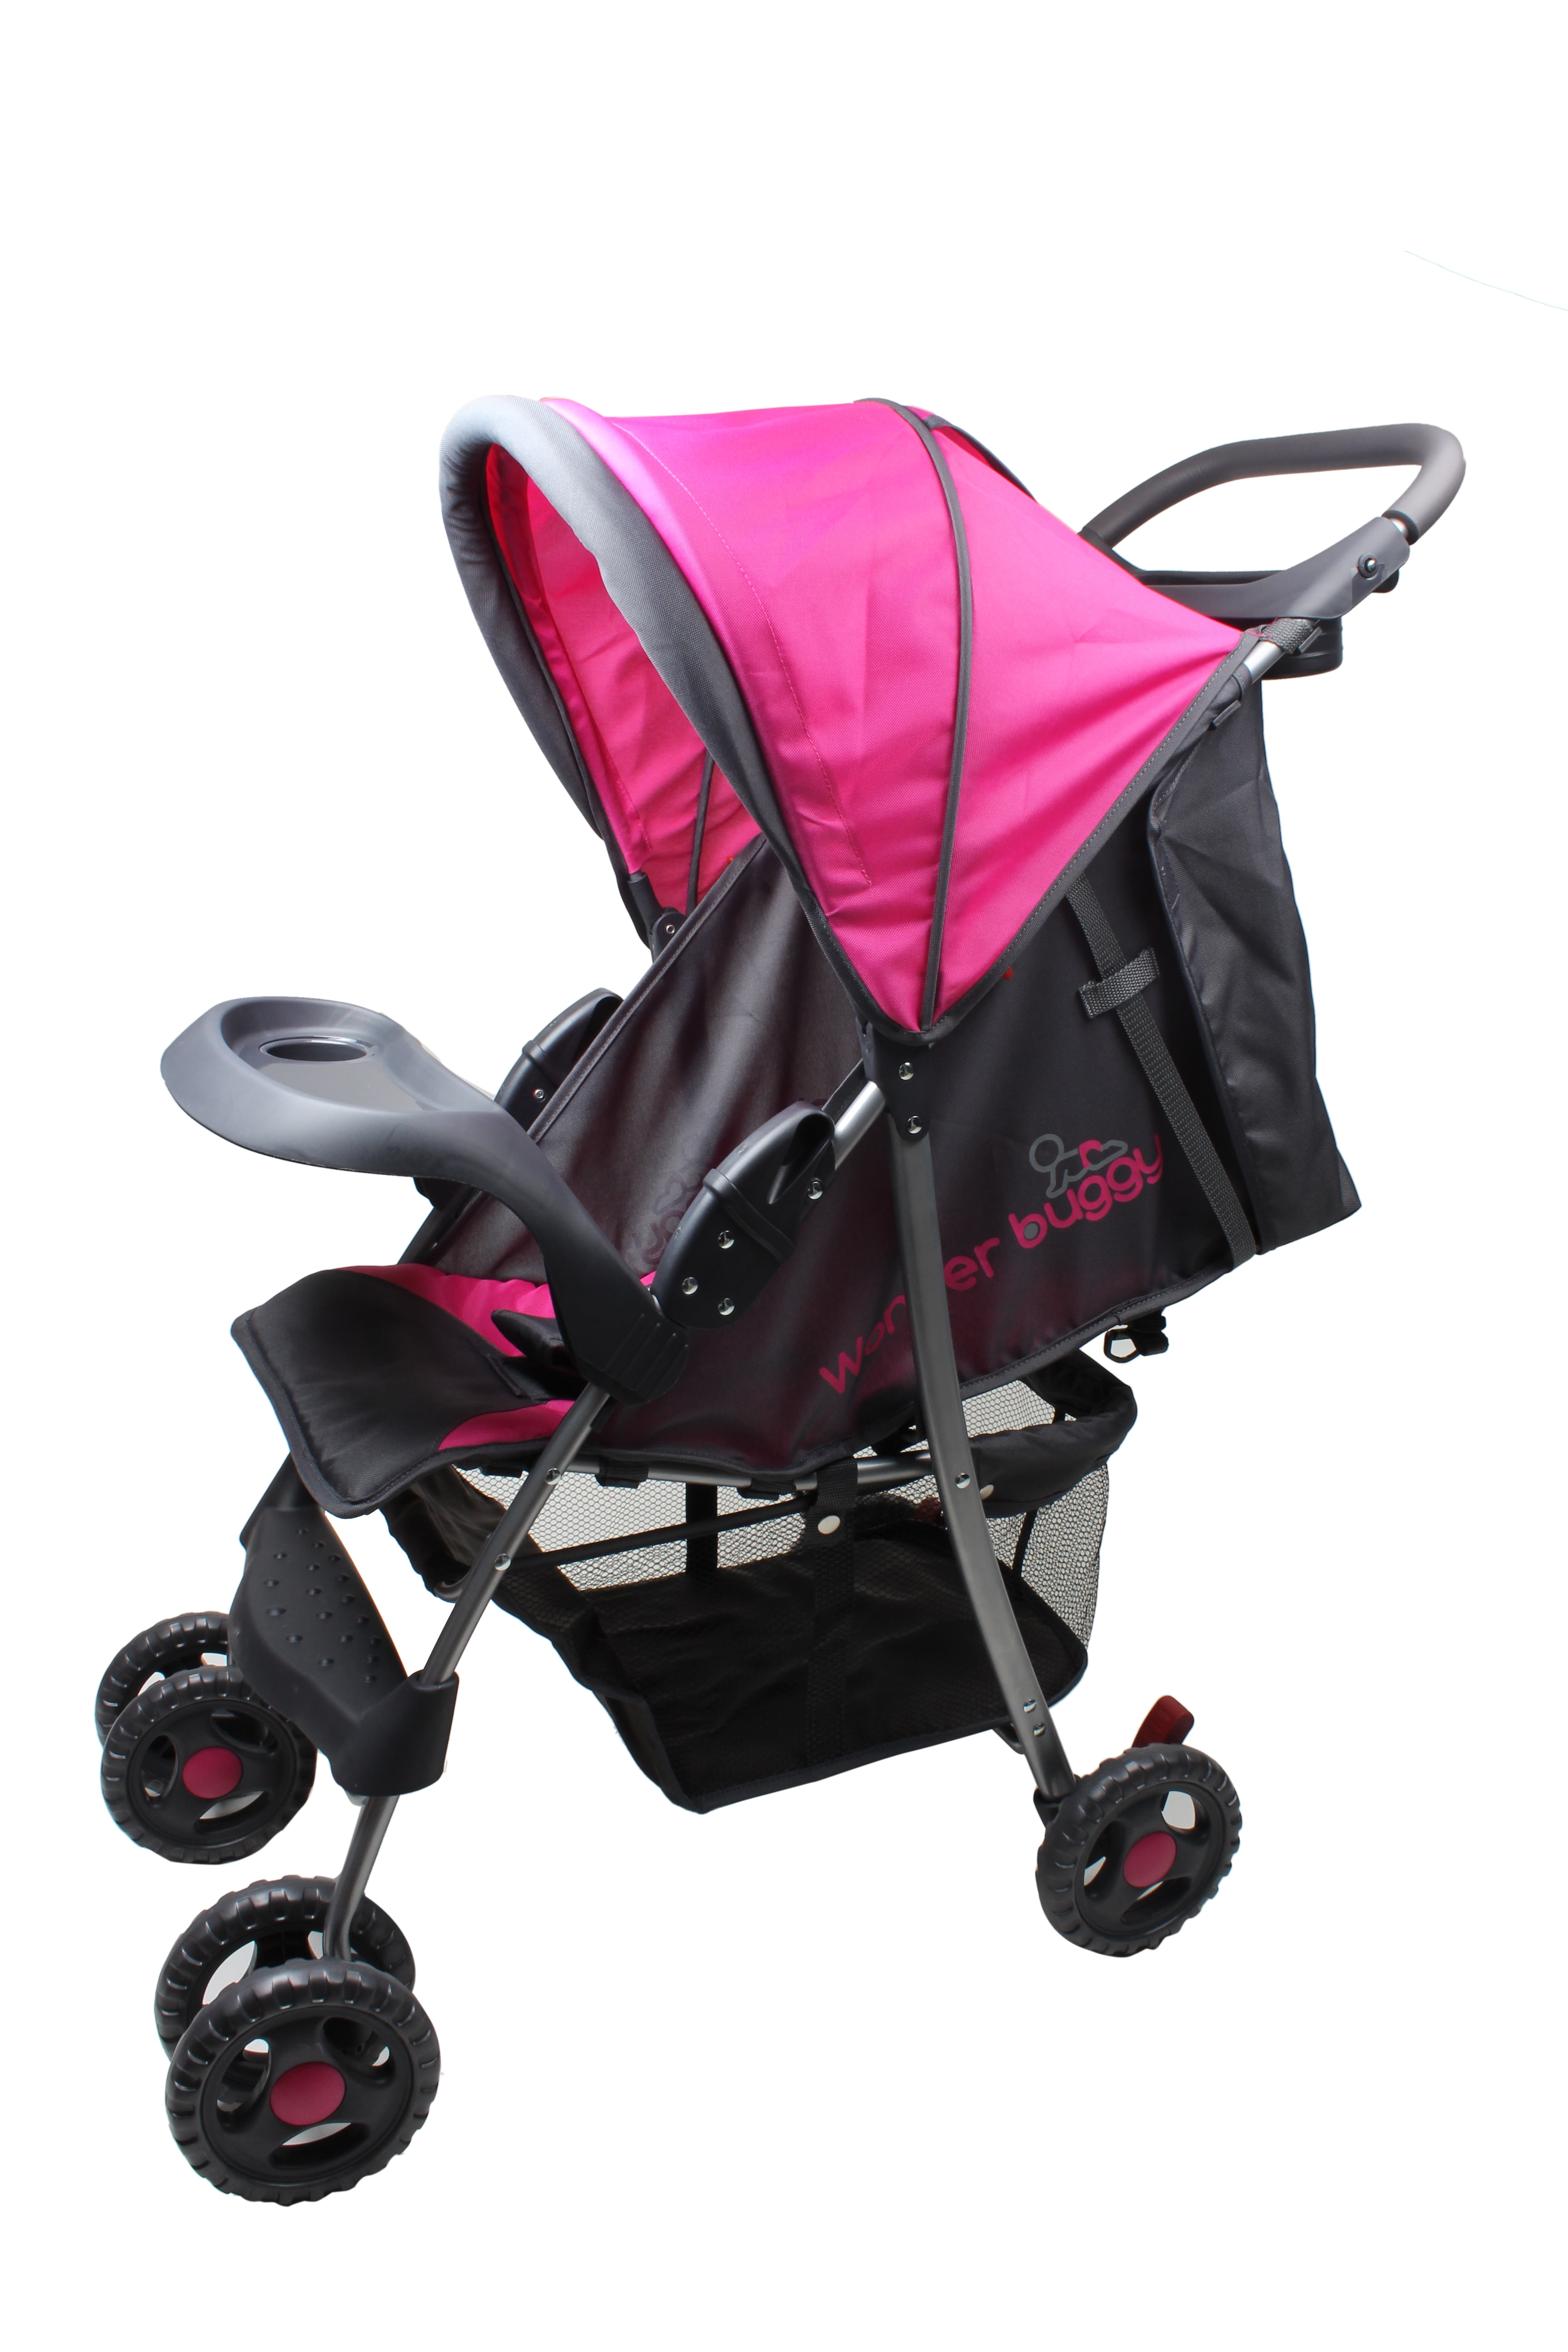 stroller with canopy